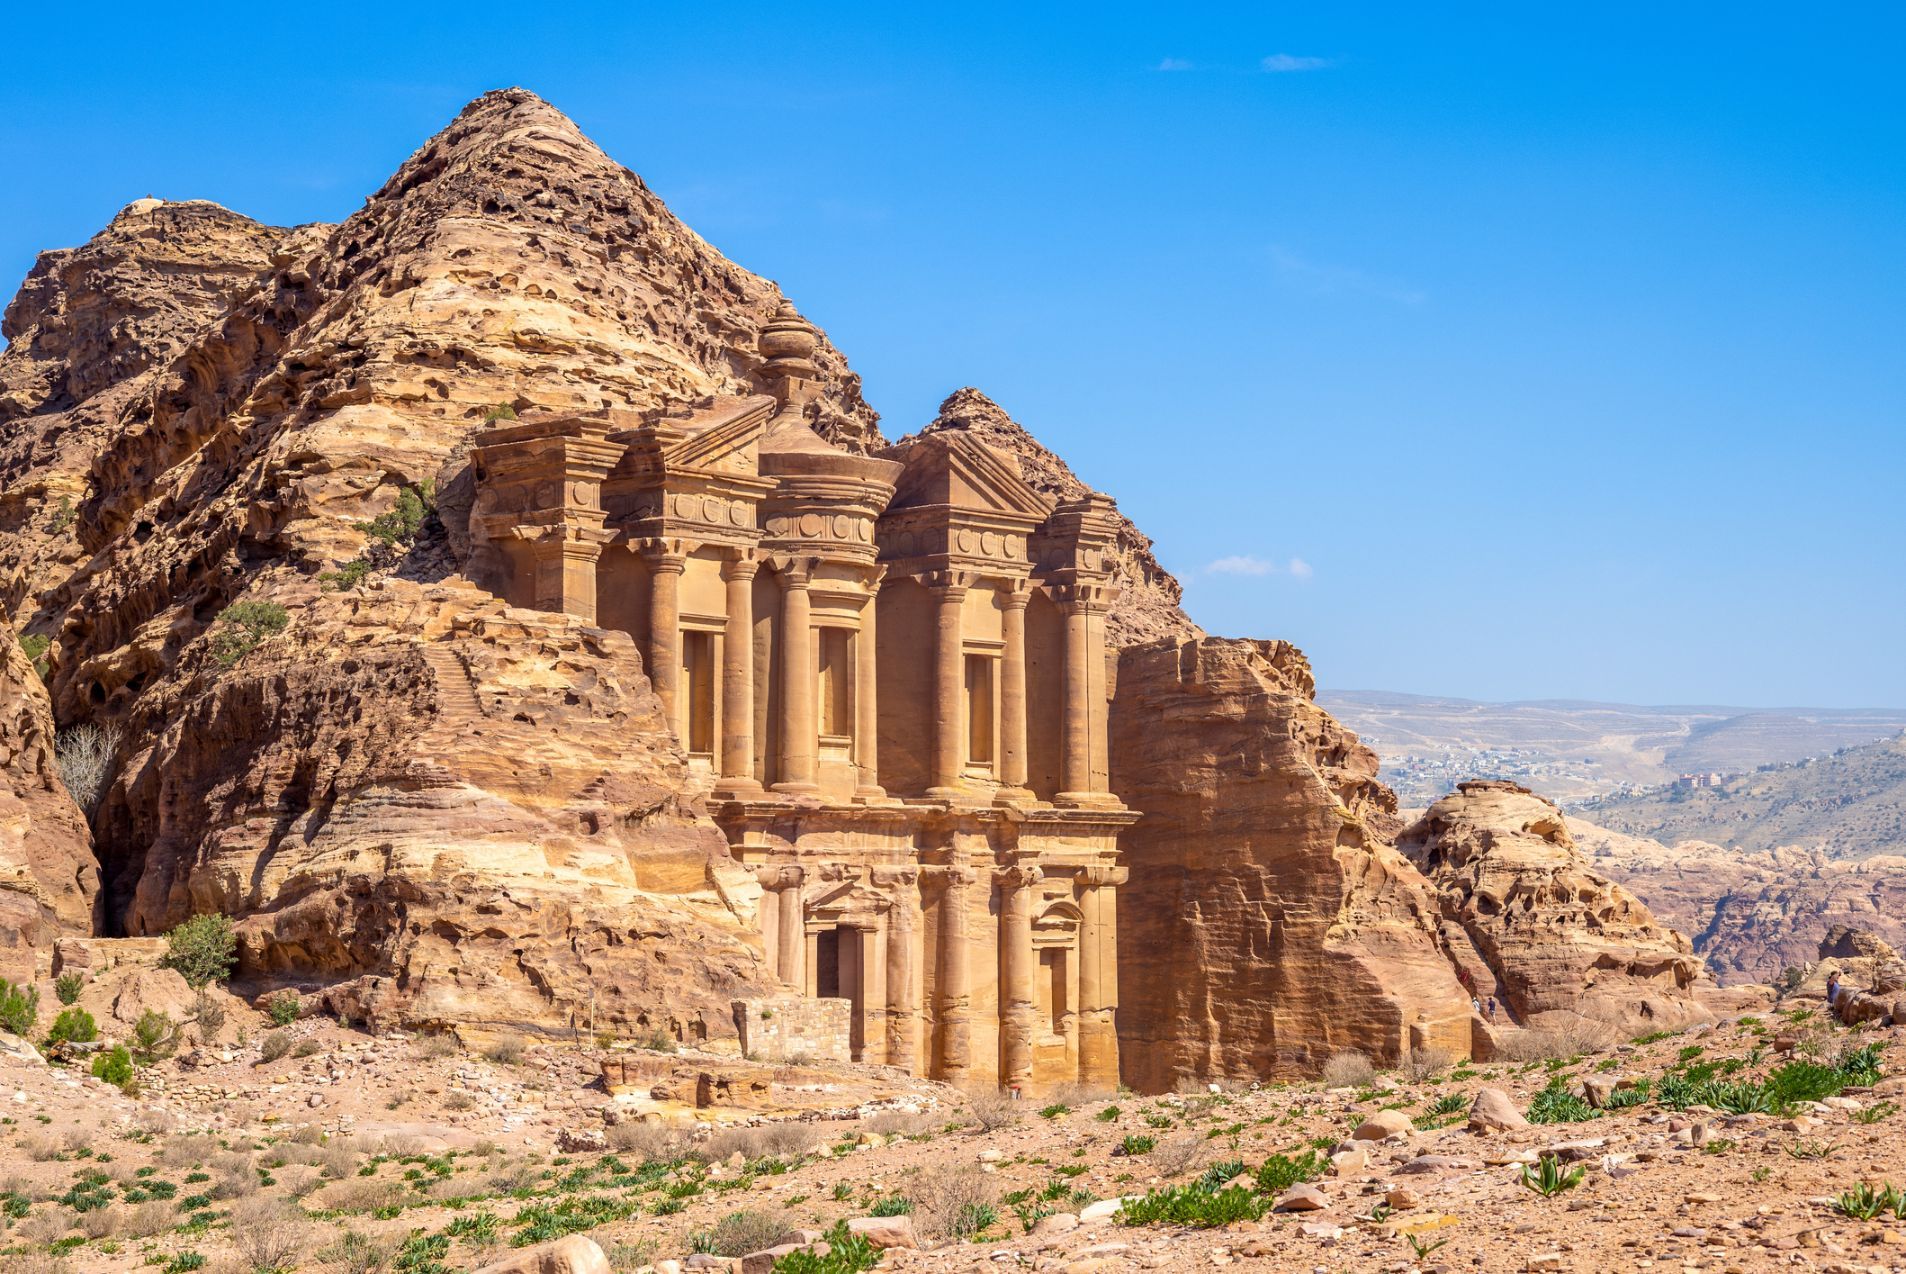 The stunning Ad-Deir, also known as The Monastery, in the city of Petra in Jordan.